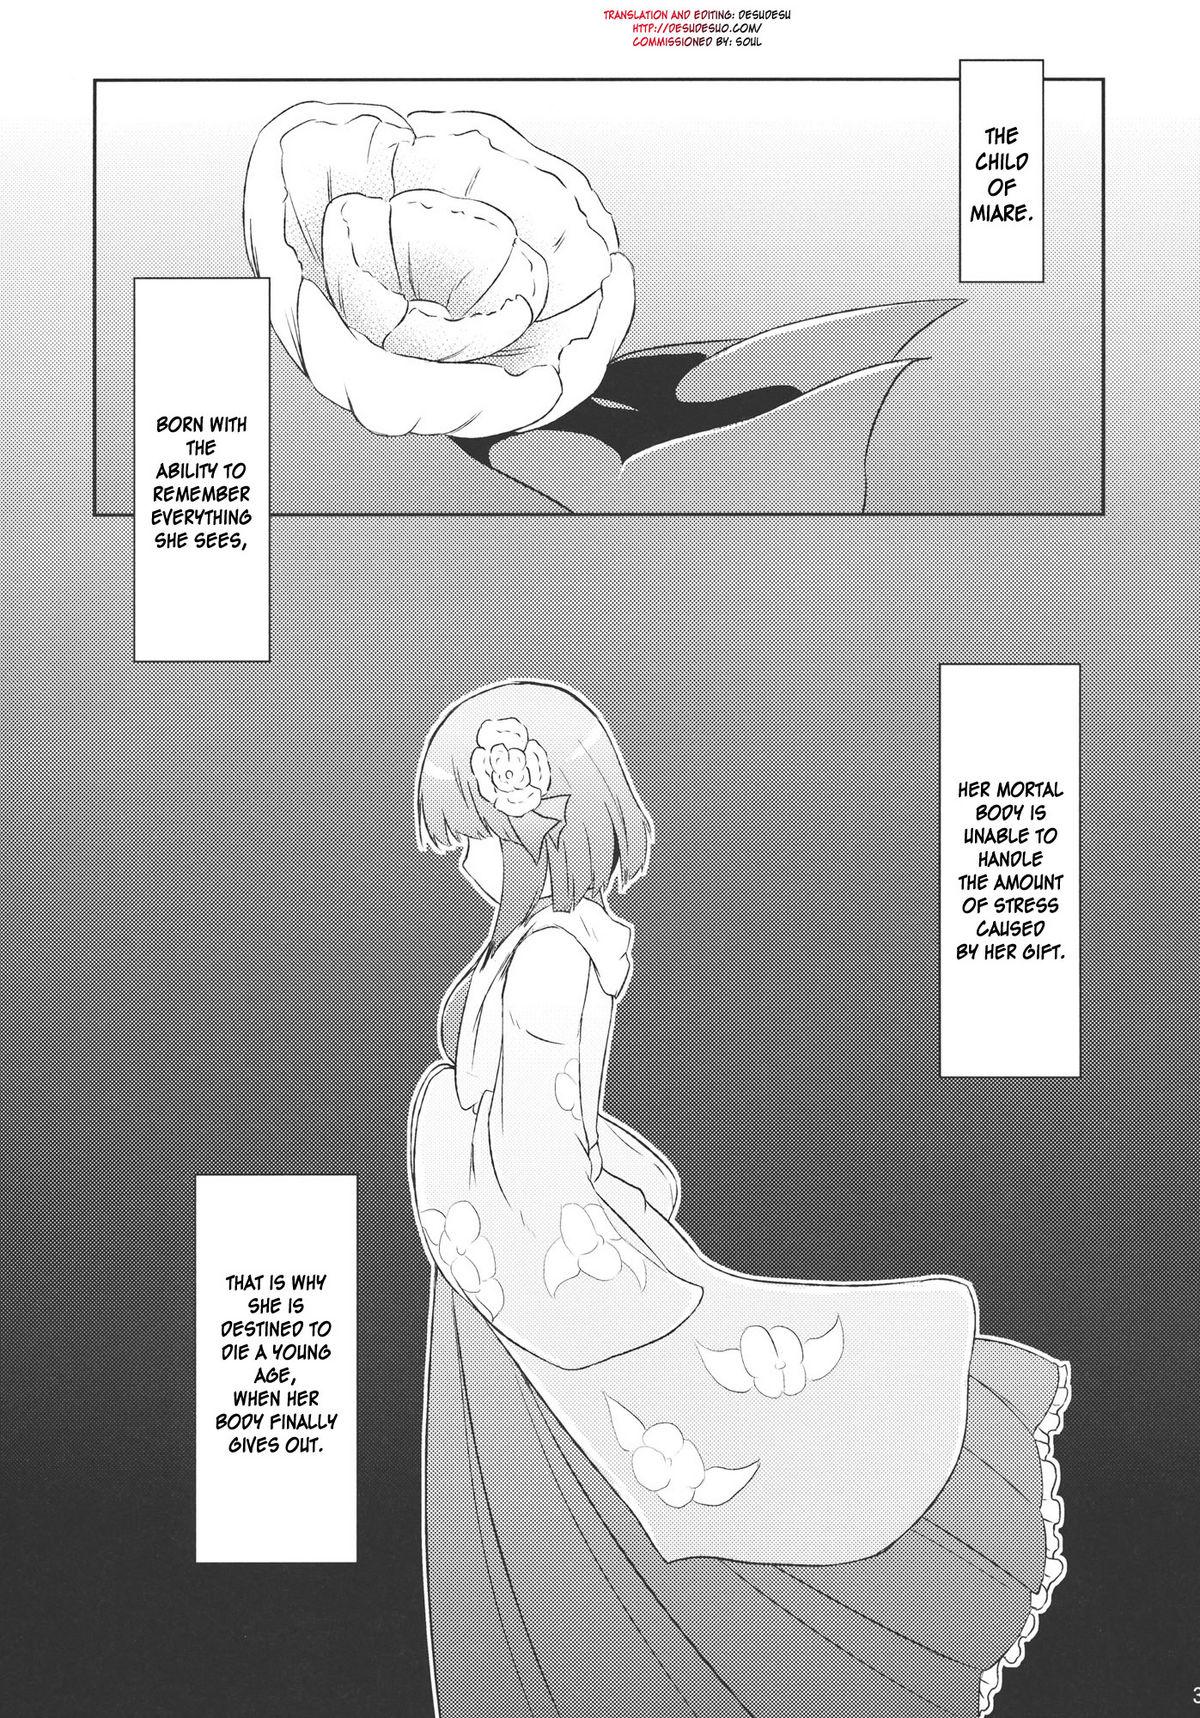 Amature Sex Tapes Hieda no Musume, Hatsujou su - Touhou project Russian - Page 3